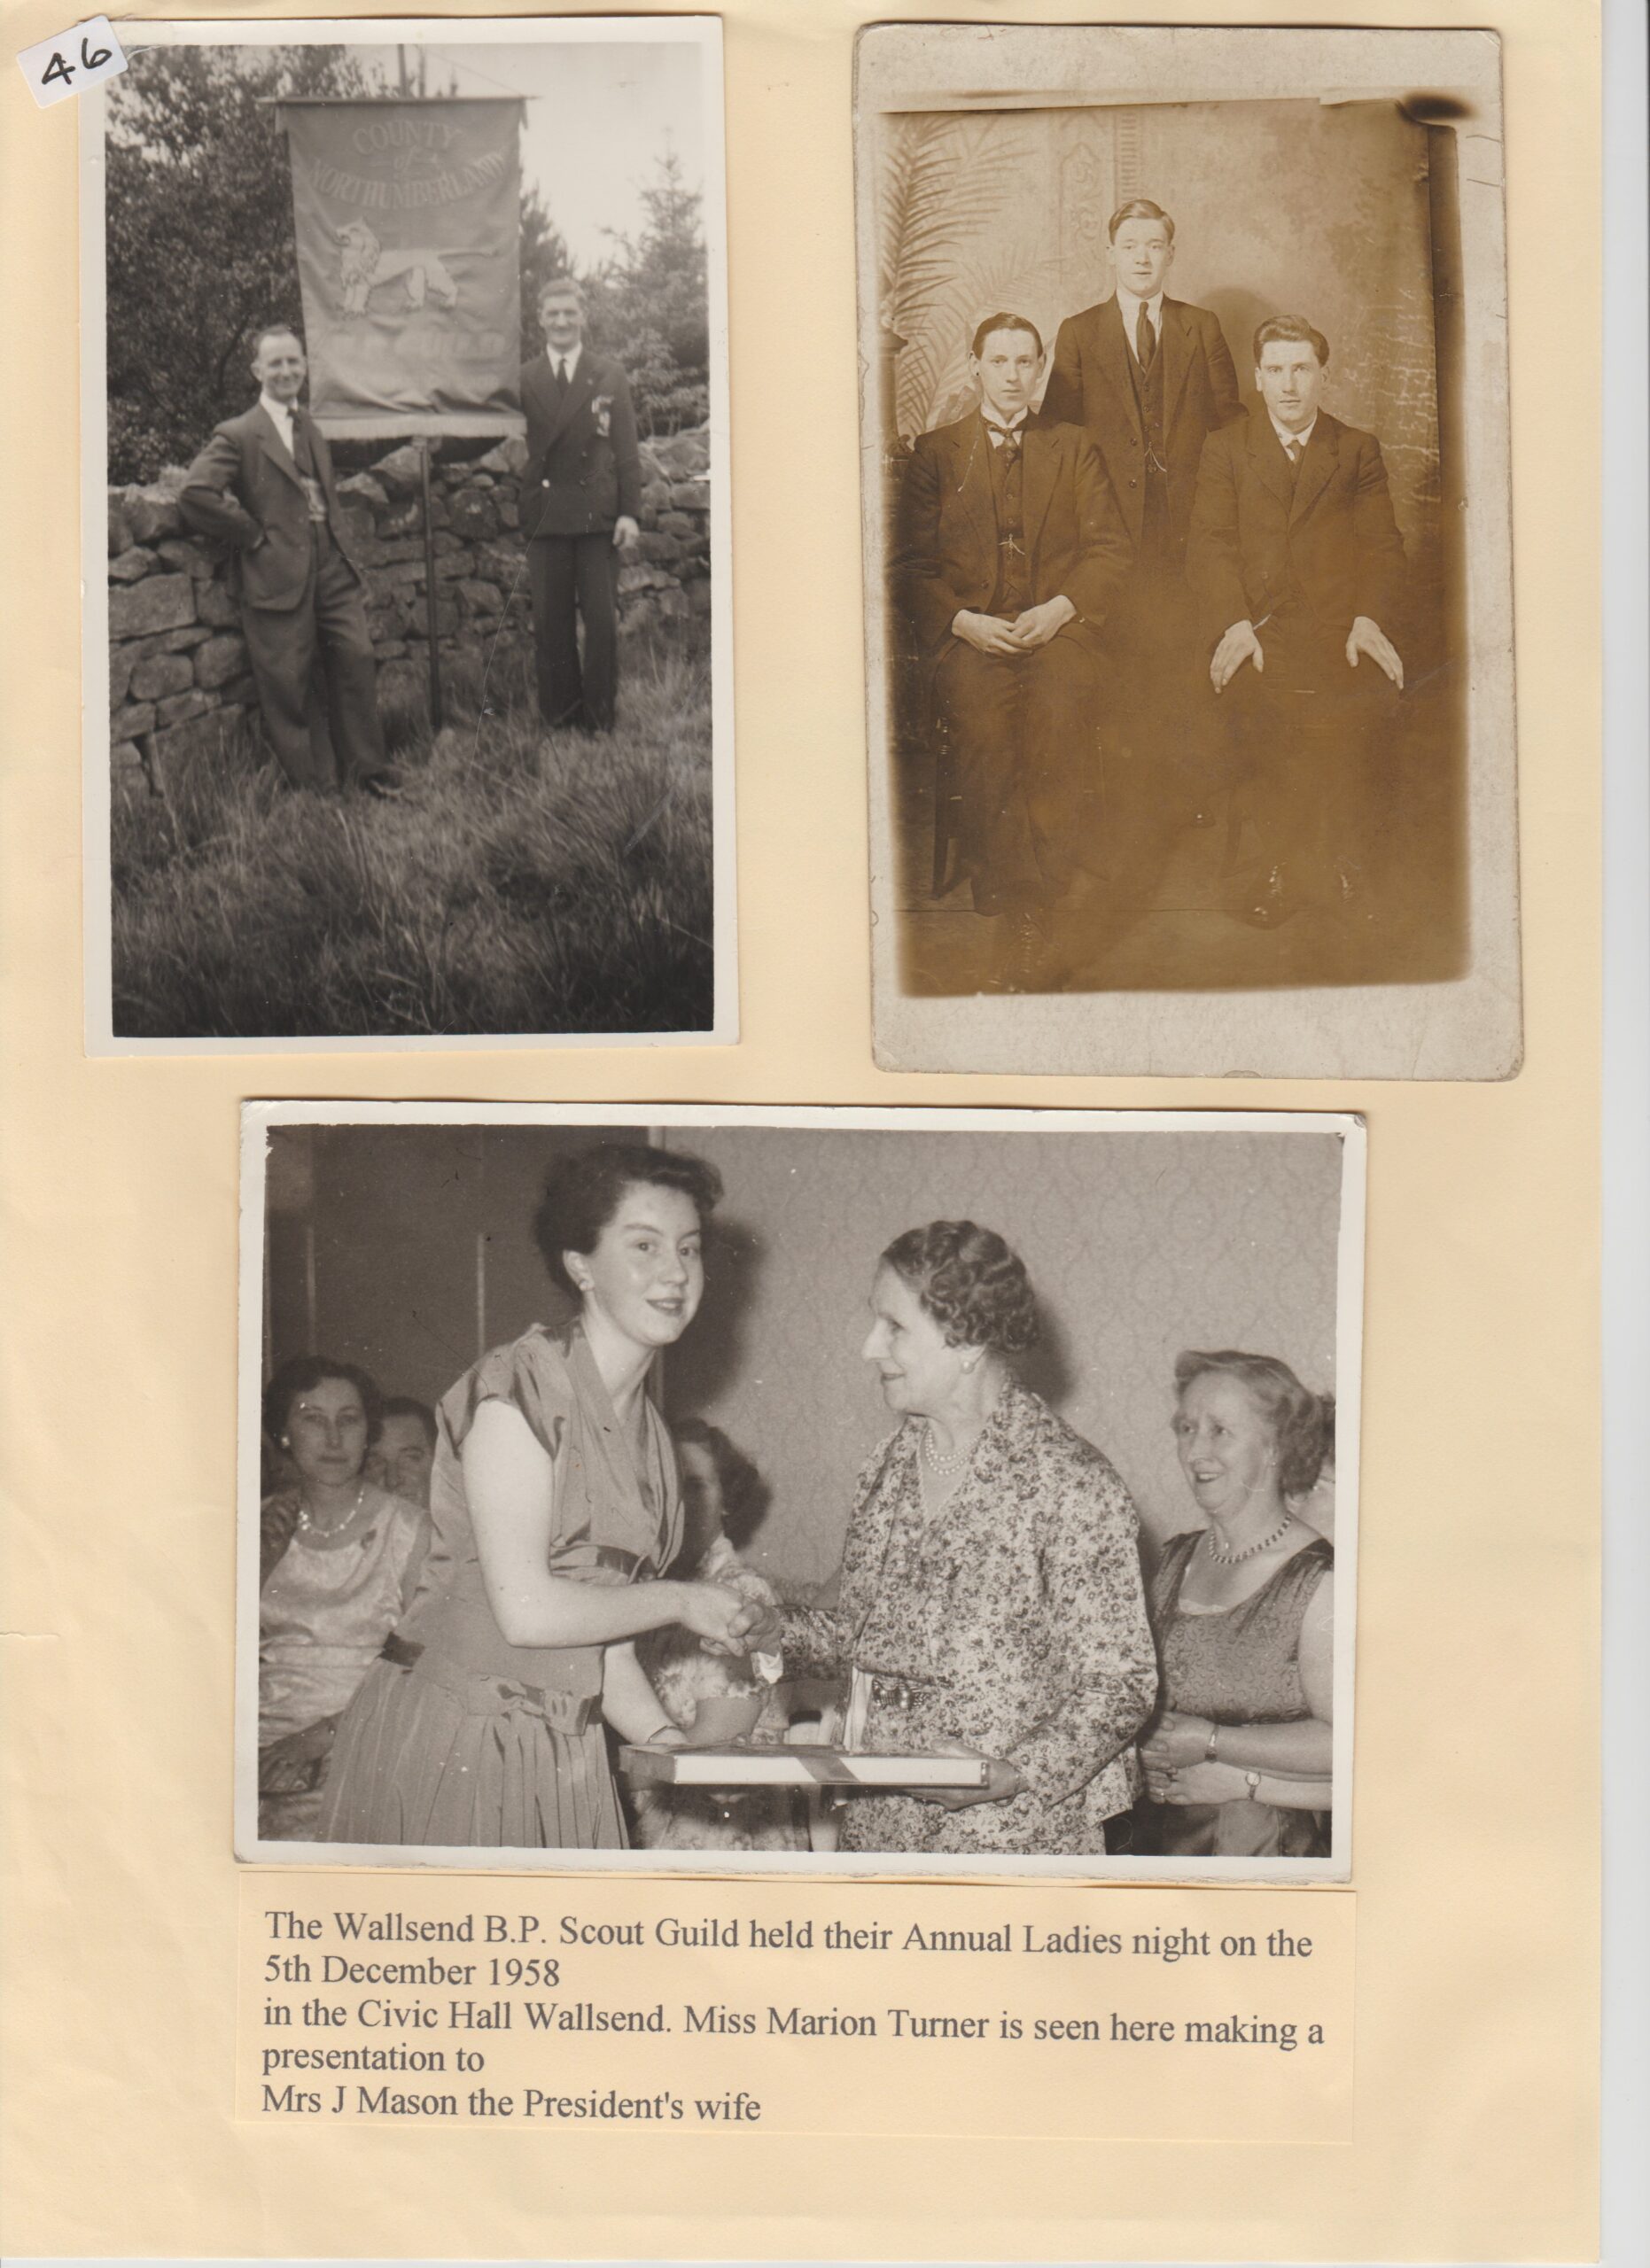 BP Scout Guild Annual Ladies Night 1958 with Marion Turner _ Mrs J Mason, Two unknown Images